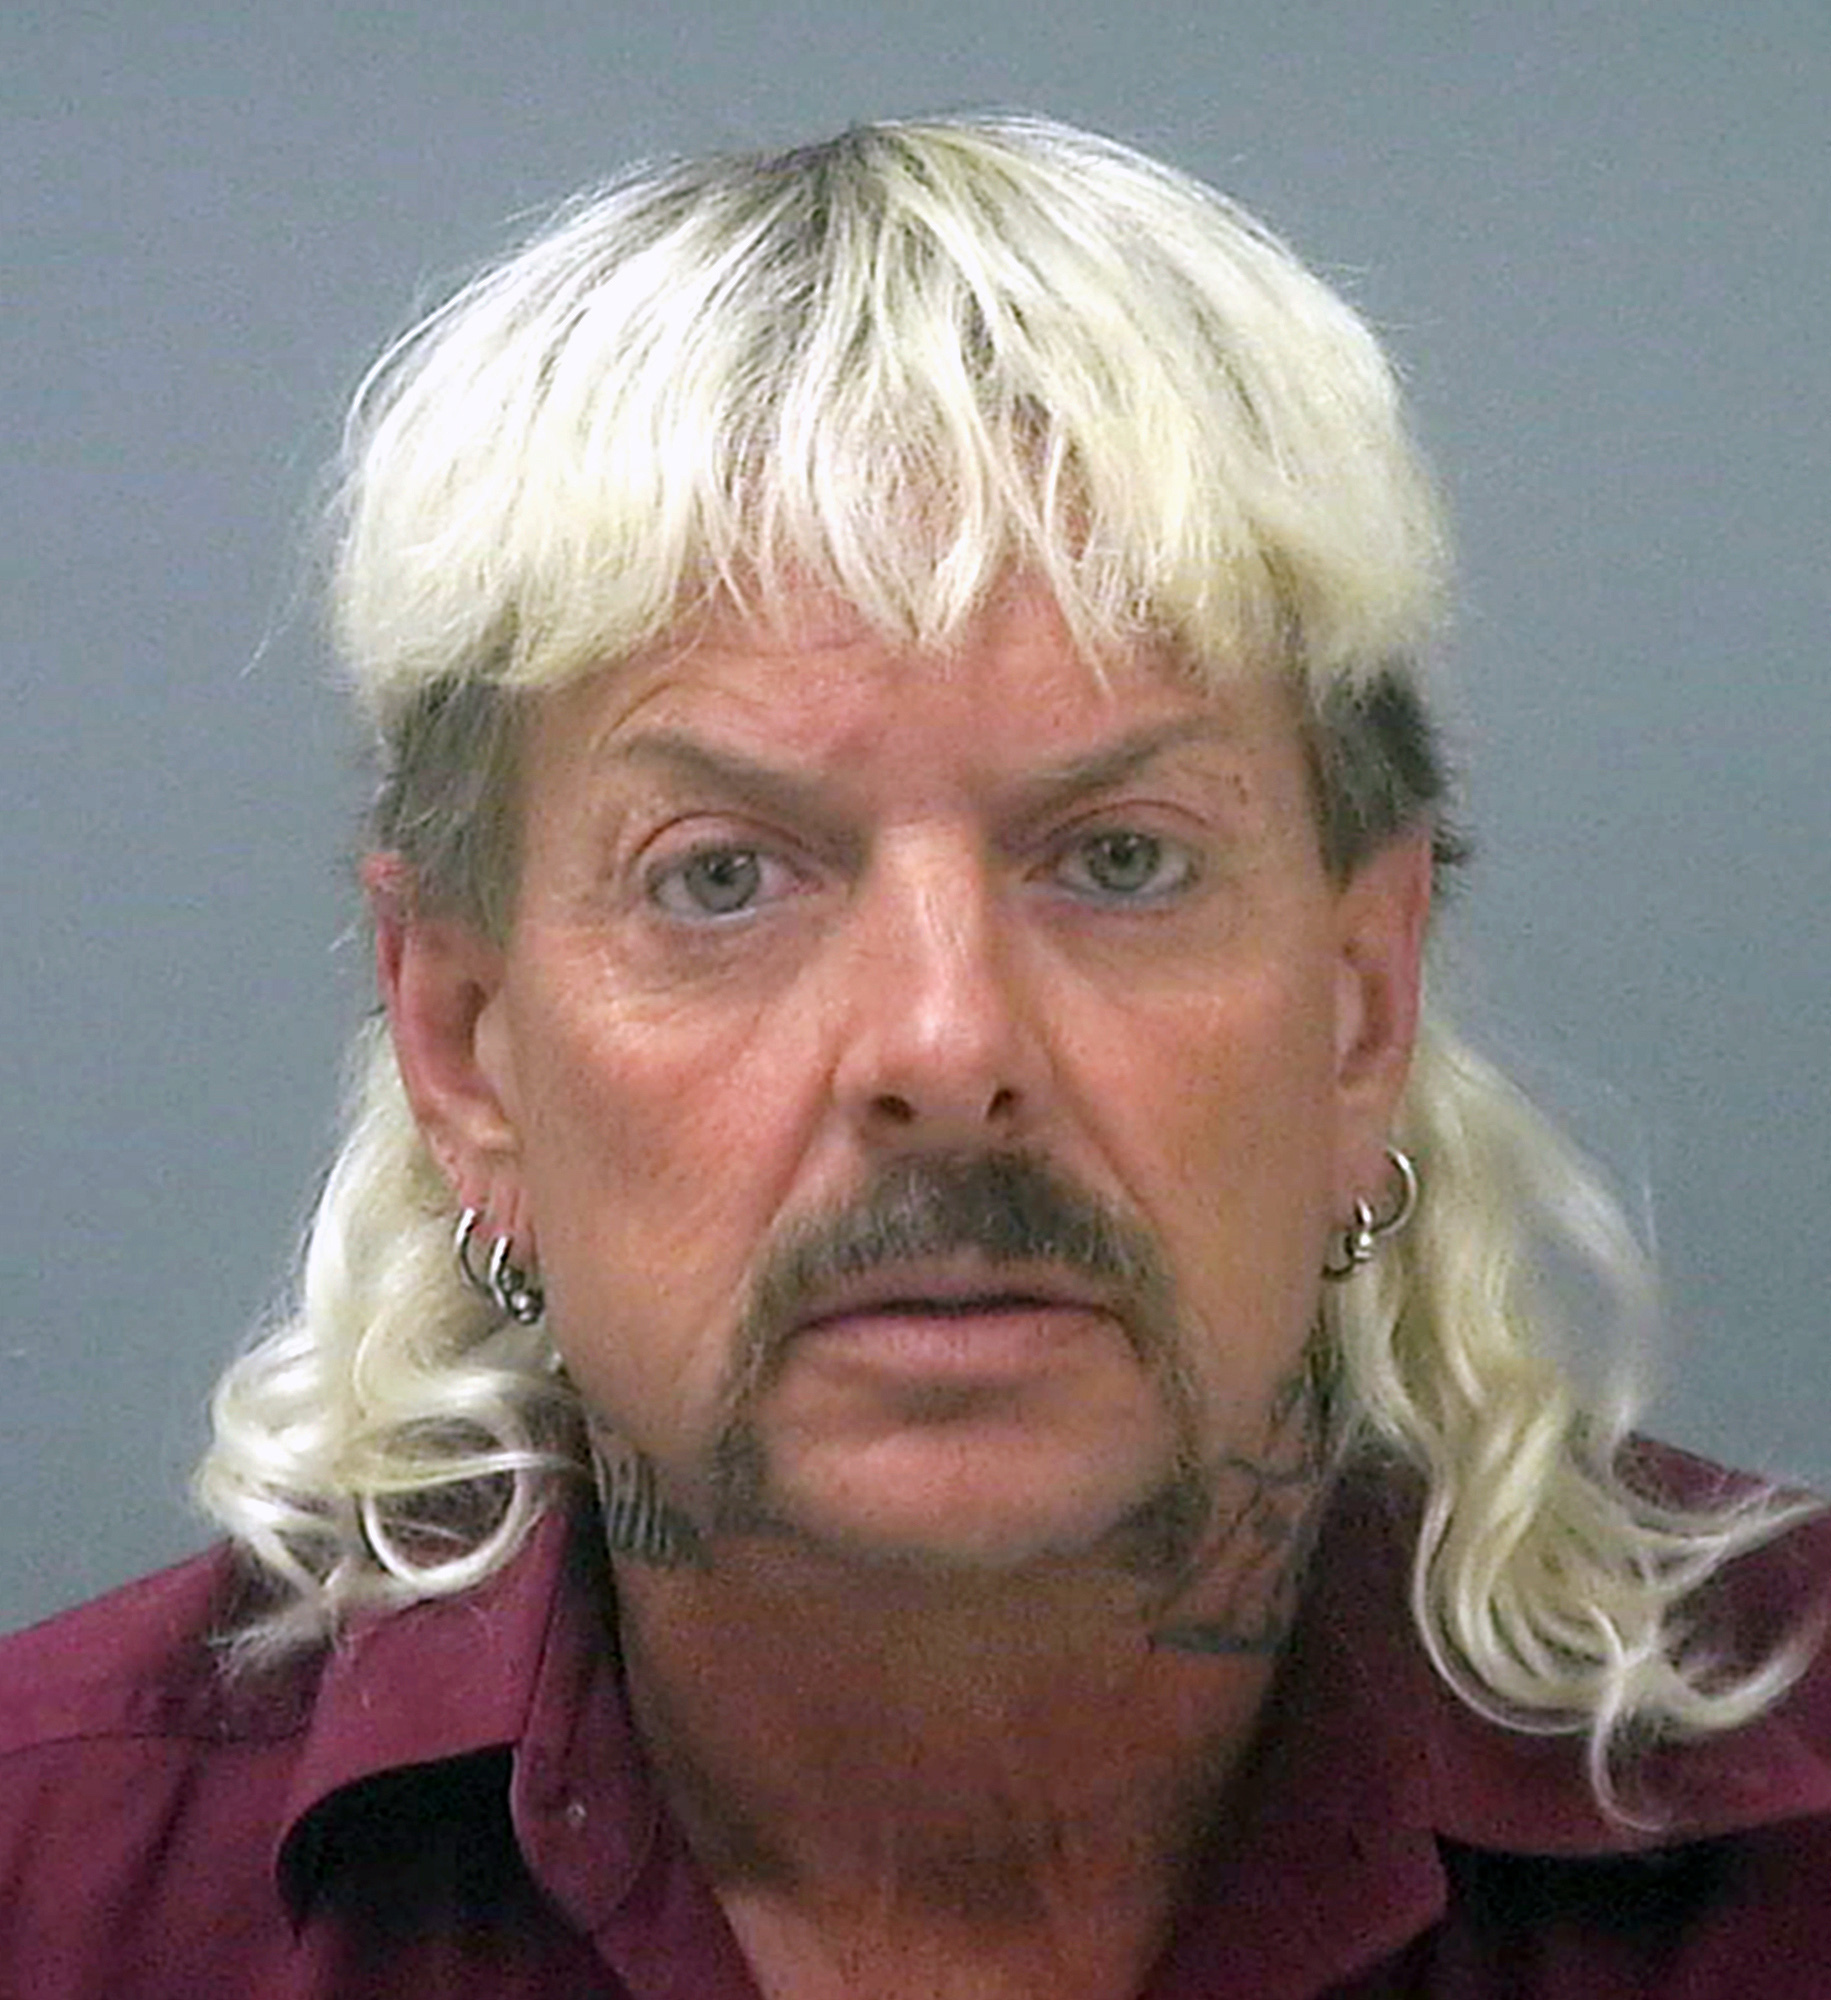 FILE - This undated file photo provided by the Santa Rose County Jail in Milton, Fla., shows Joseph Maldonado-Passage, also known as Joe Exotic. The man known as the "Tiger King" who gained fame in a Netflix documentary following his conviction for trying to hire someone to kill an animal rights activist says he has an "aggressive cancer." (Santa Rosa County Jail via AP, File)